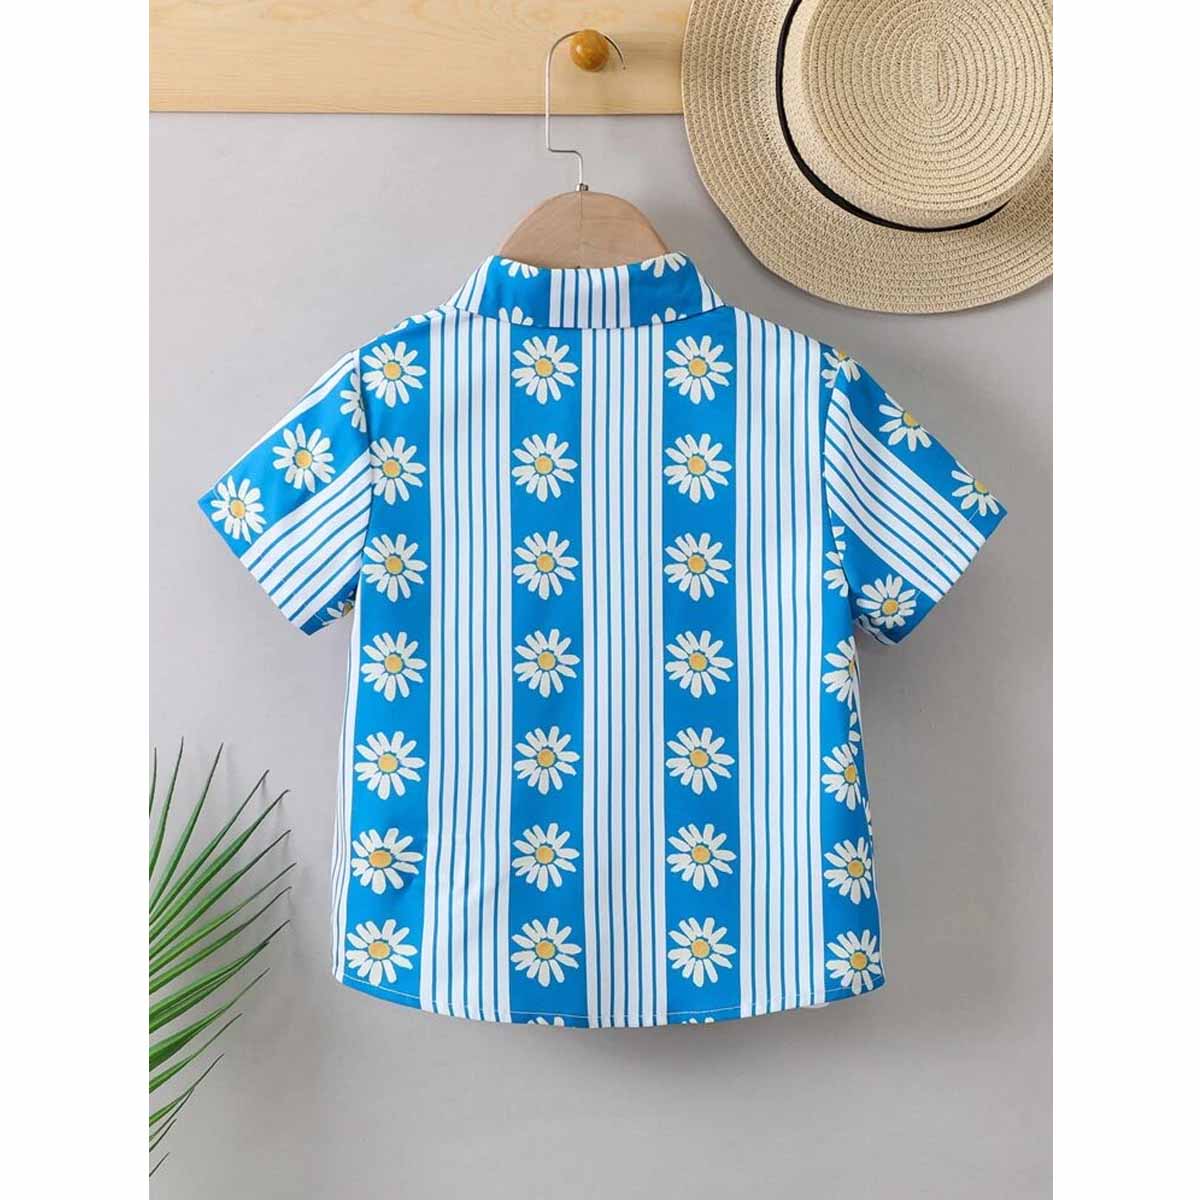 Venutaloza Boy's Tropical's & Daisy And Striped and Plaid Patched Pocket Designer Button Front (Combo Pack Of 3) Shirt For Boy.